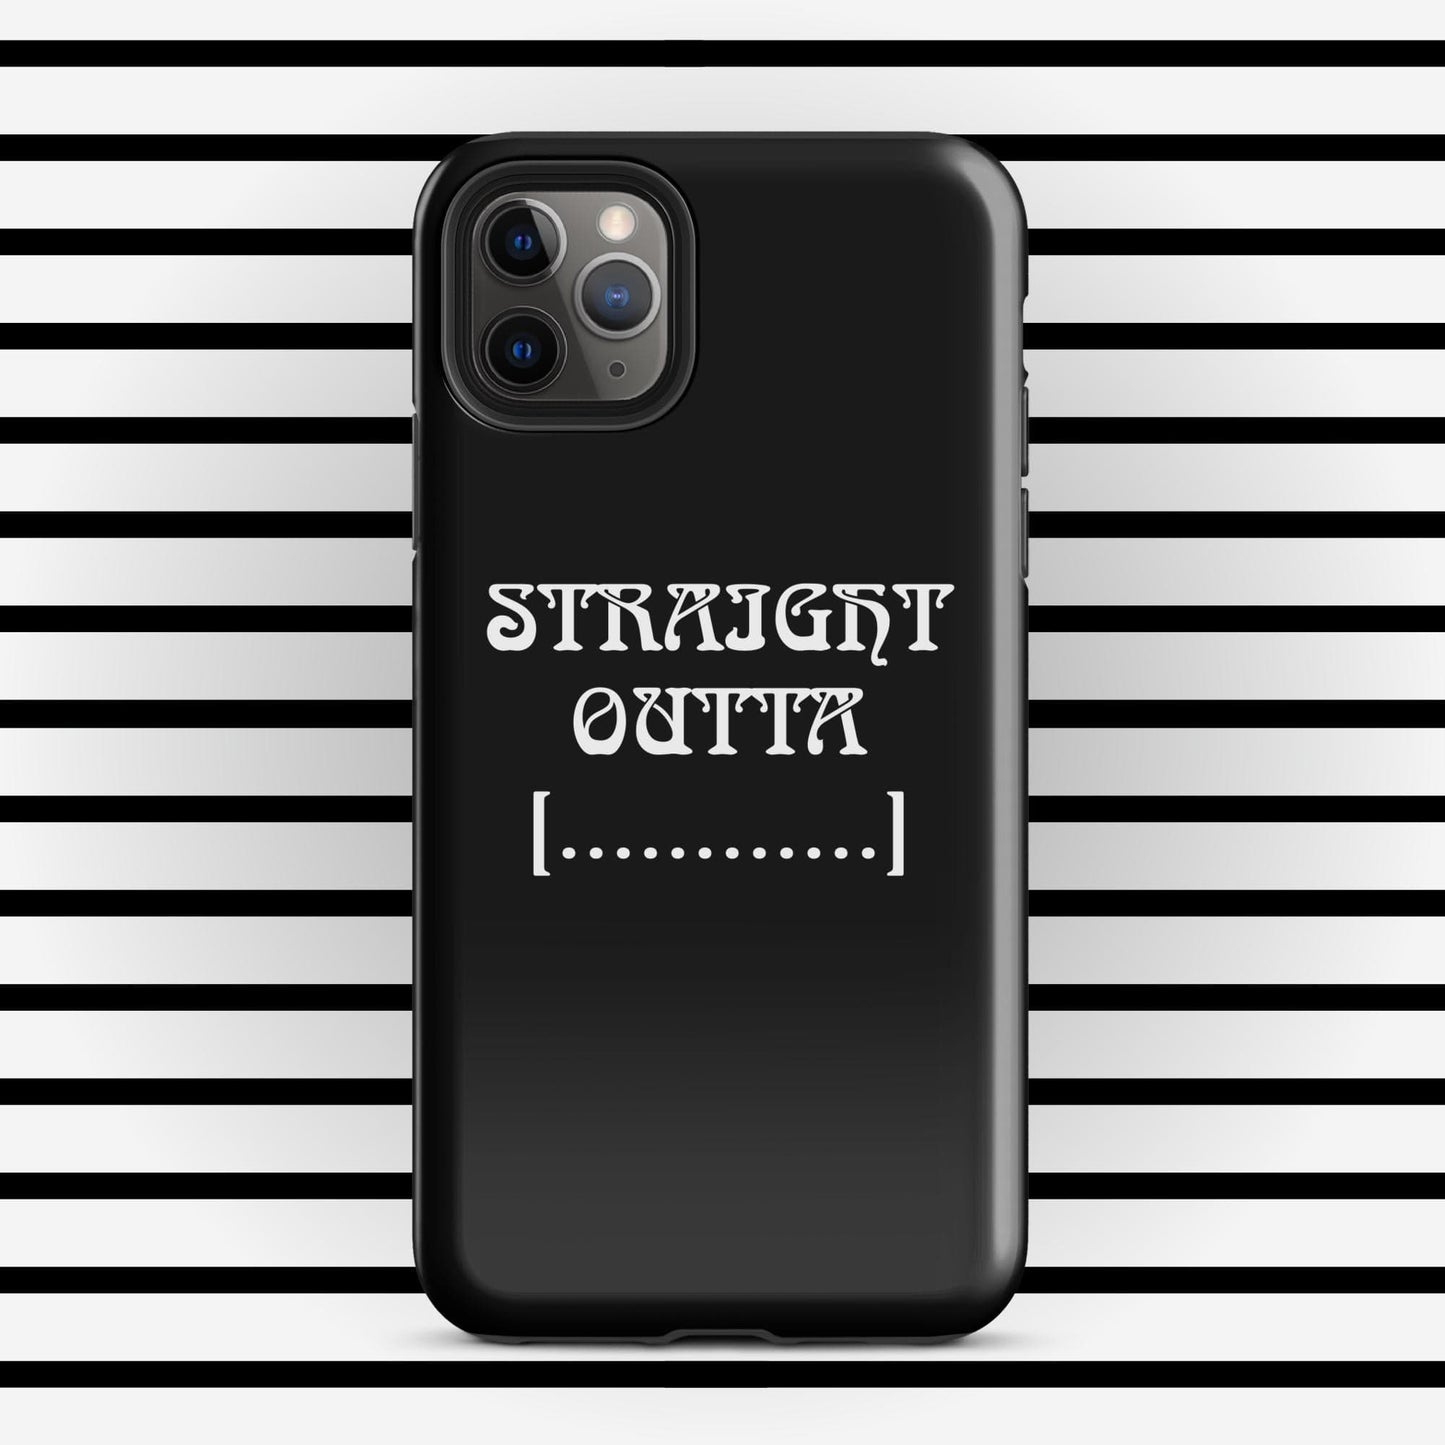 Trendyguard iPhone 11 Pro Max STRAIGHT OUTTA | [Custom] Tough Case for iPhone®